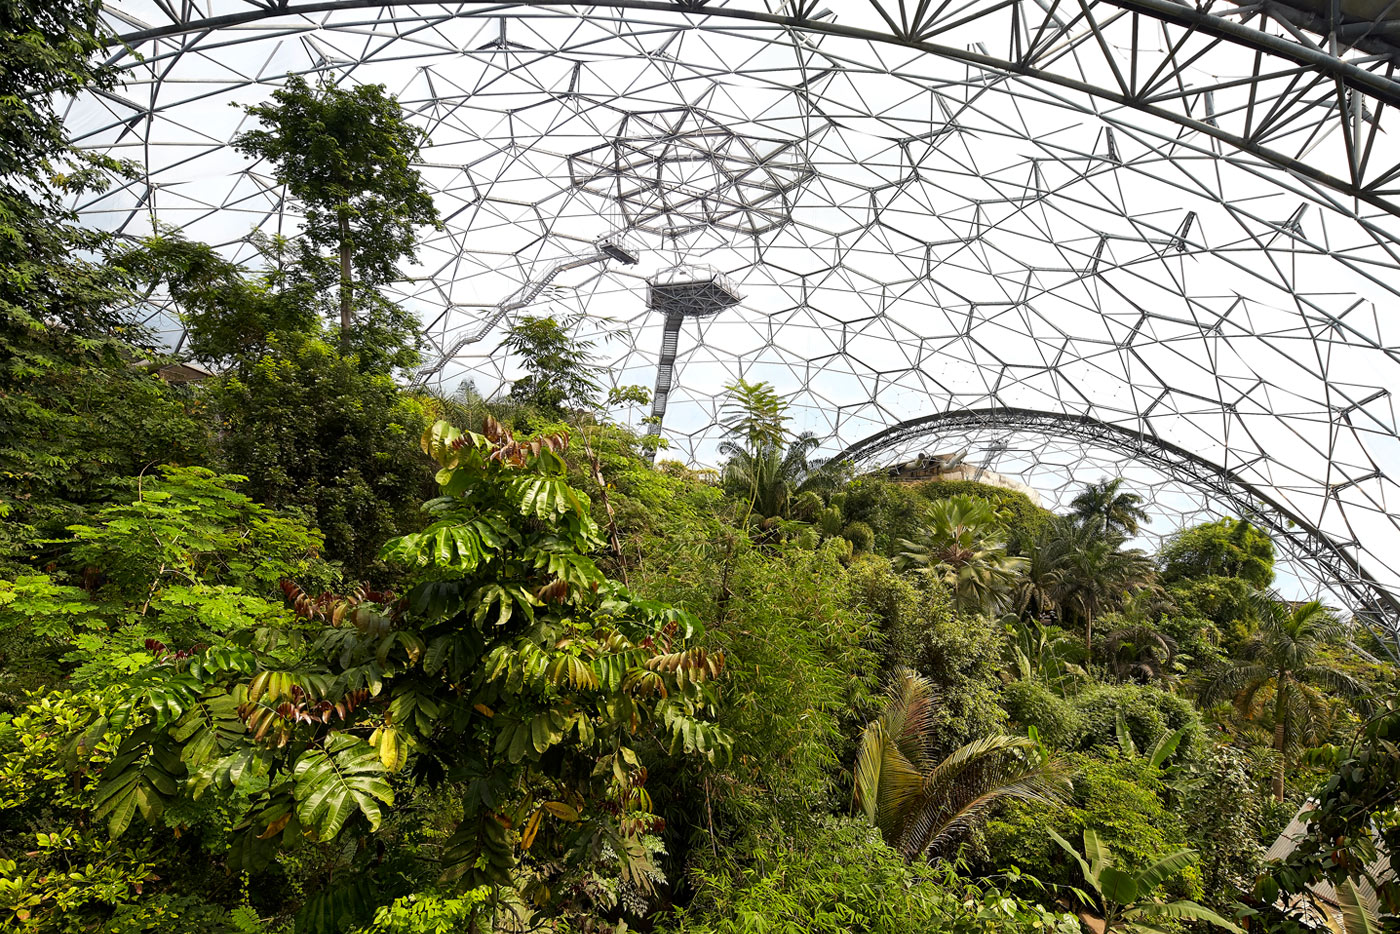 Eden Project Access and Inclusion Mystery Shopper